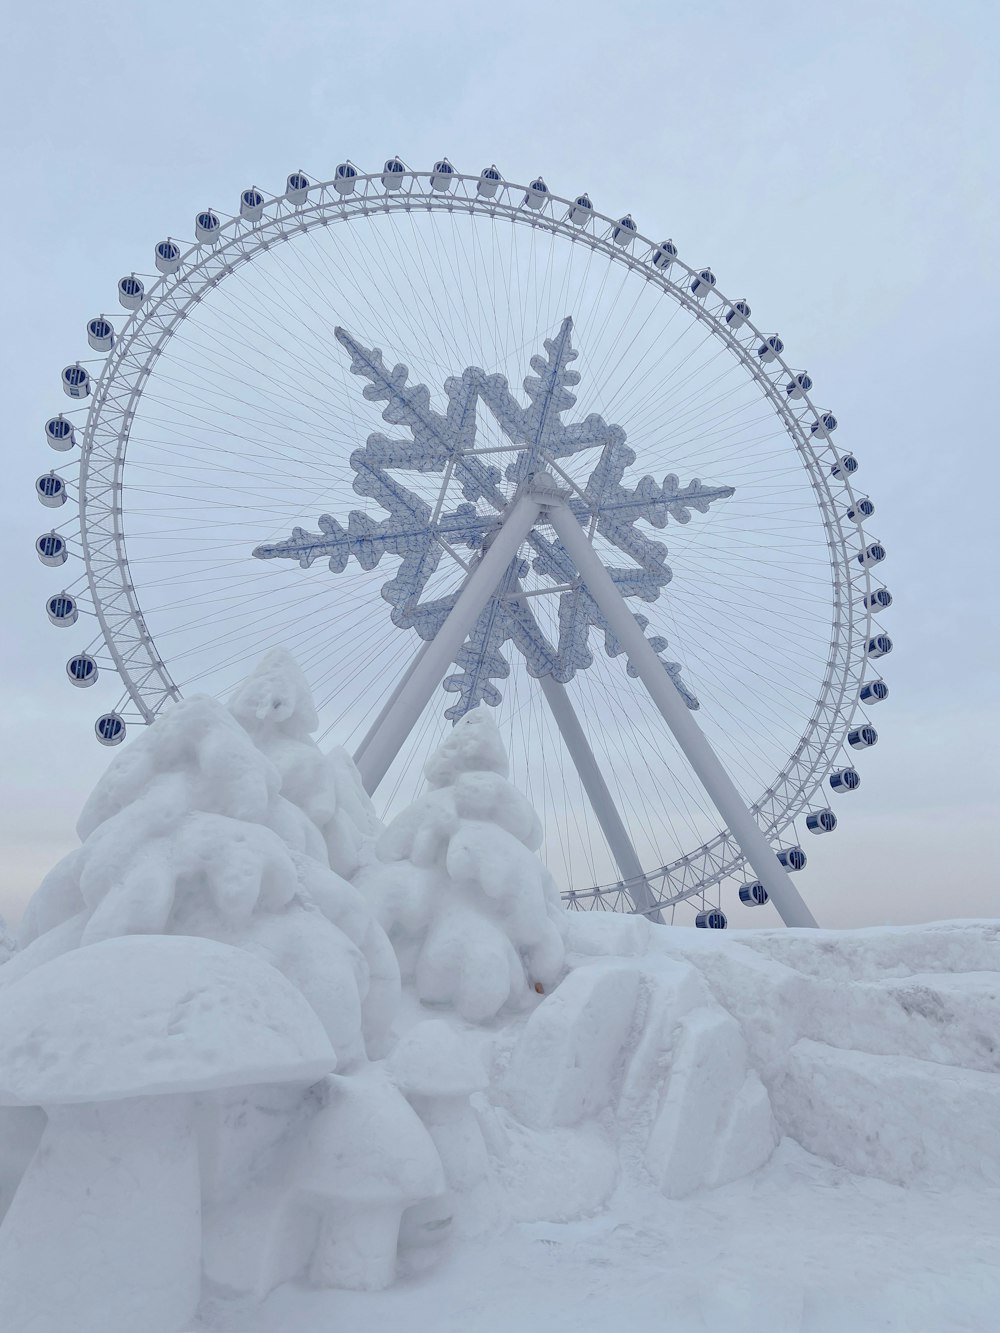 a large ferris wheel in the middle of a snowy field